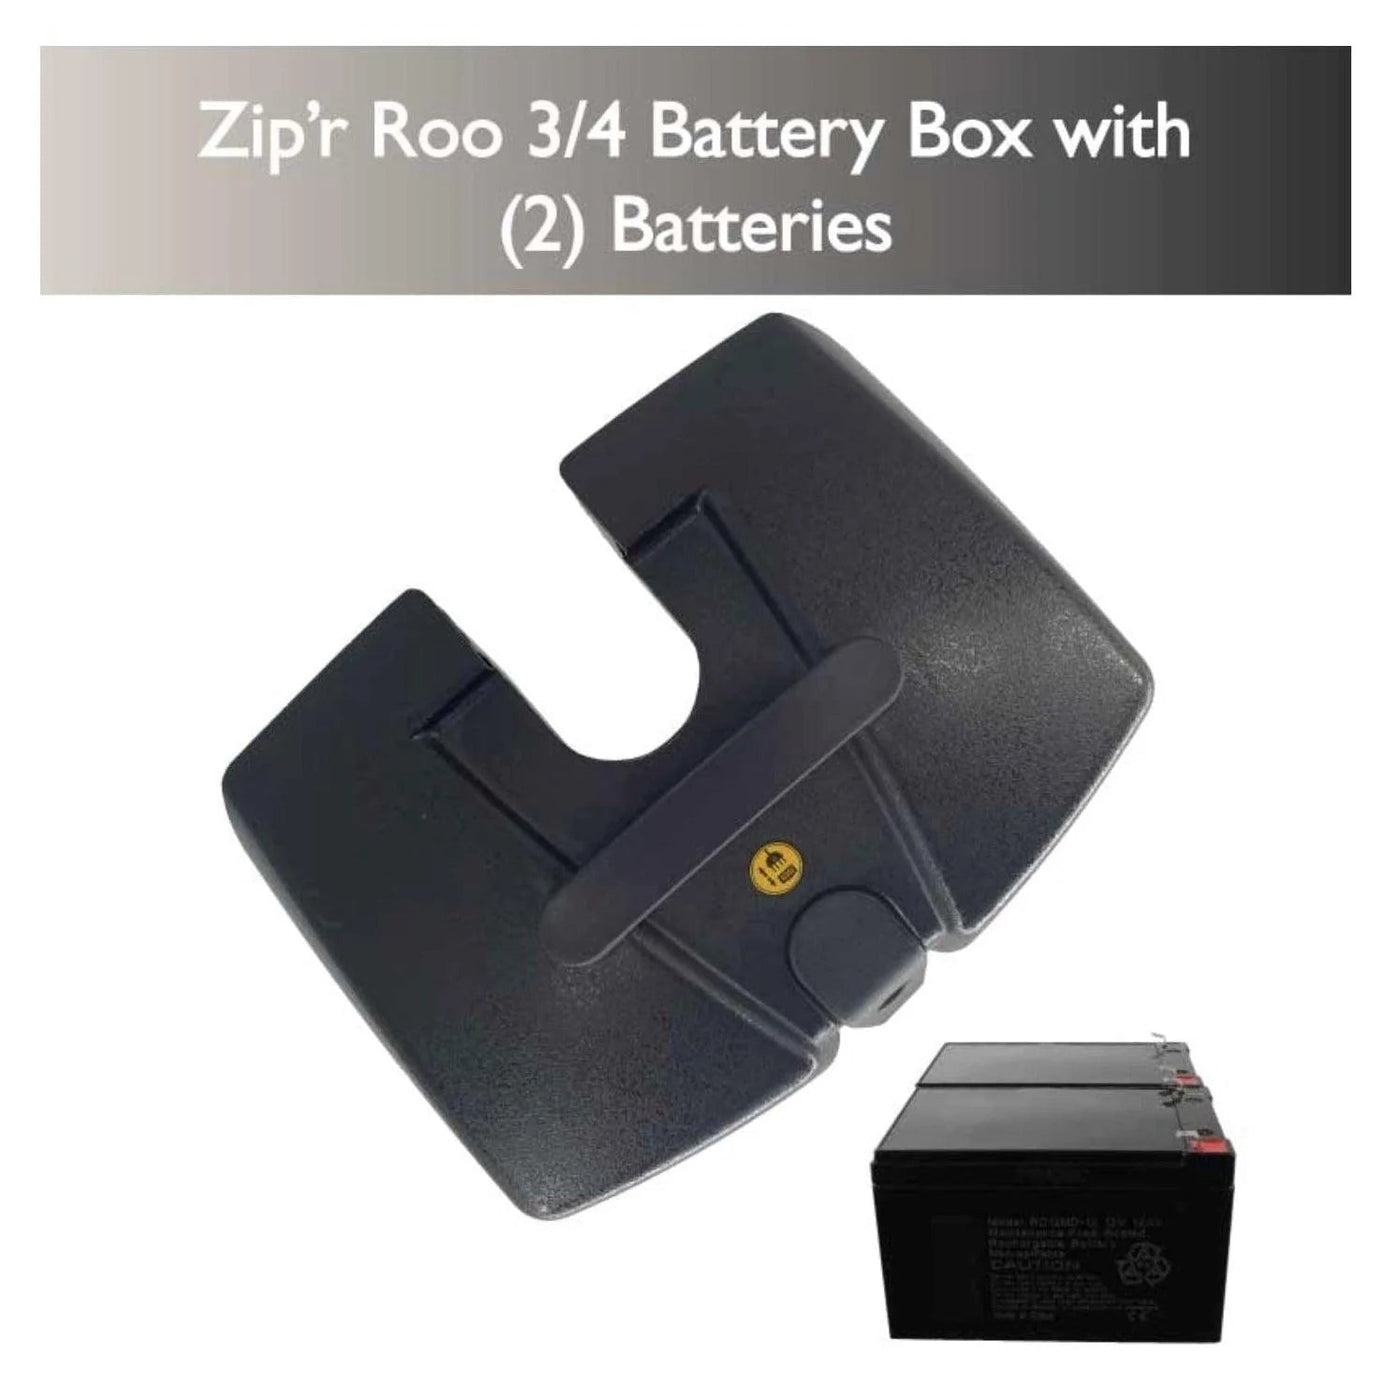 Zip'r Mobility Scooter Battery Box with (2) Batteries for Zipr Roo-TSA Approved - eBike Haul